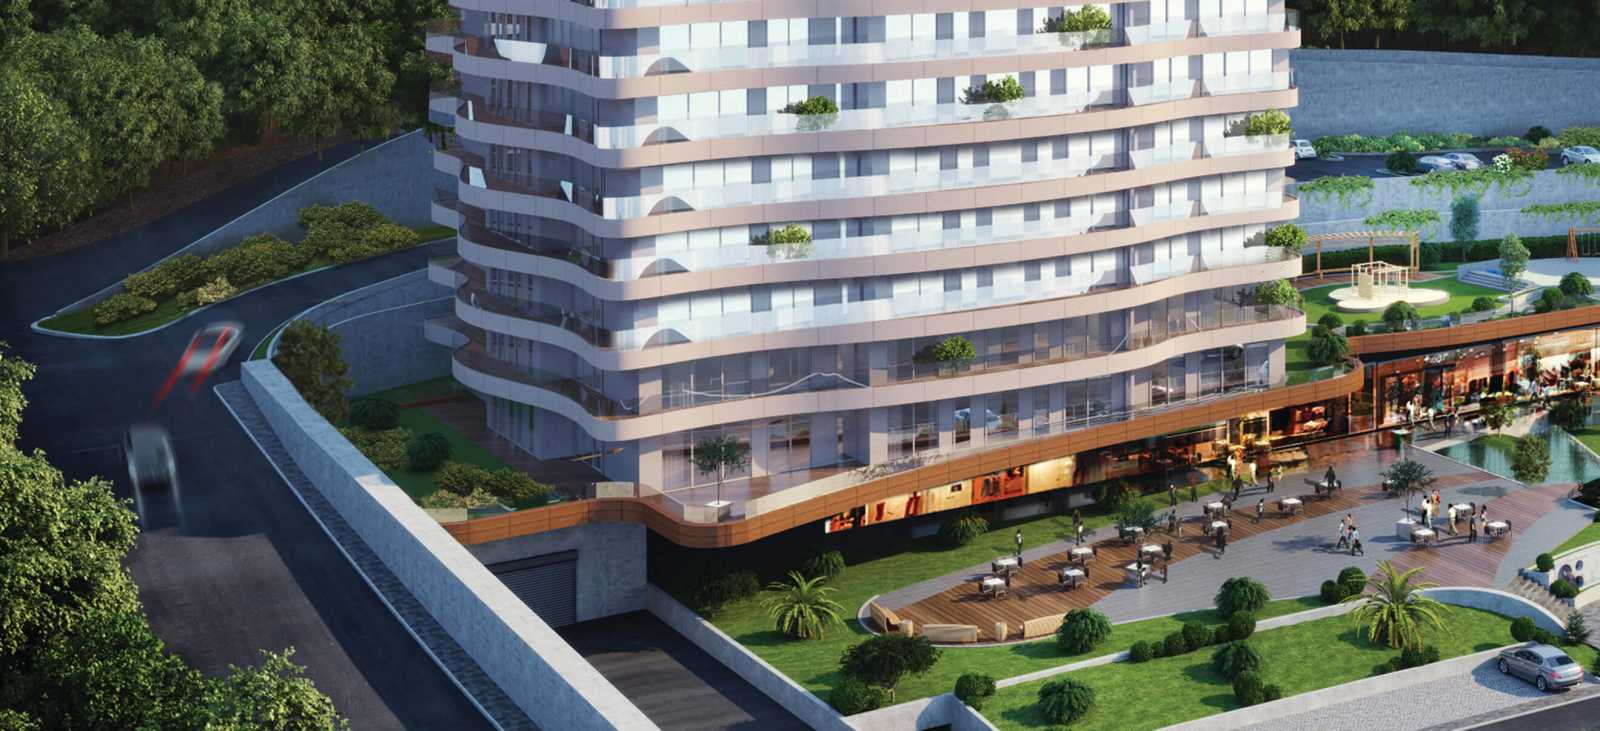 Forest View Apartments - Anatolian Istanbul - Glass balconies